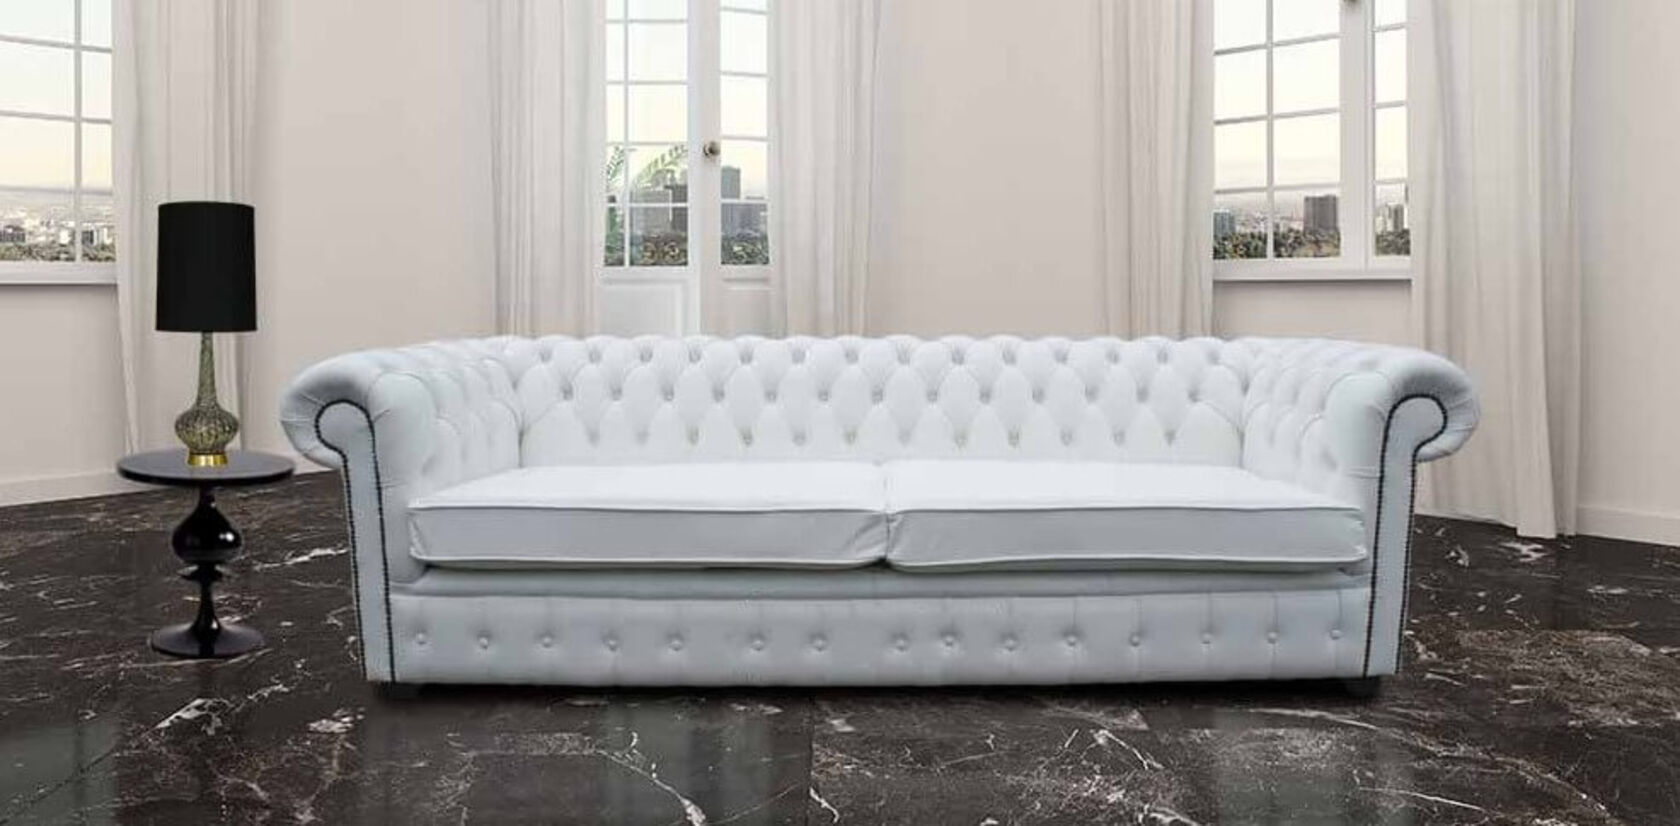 White Leather Chesterfield Sofa Uk, How To Clean White Leather Sofa Uk